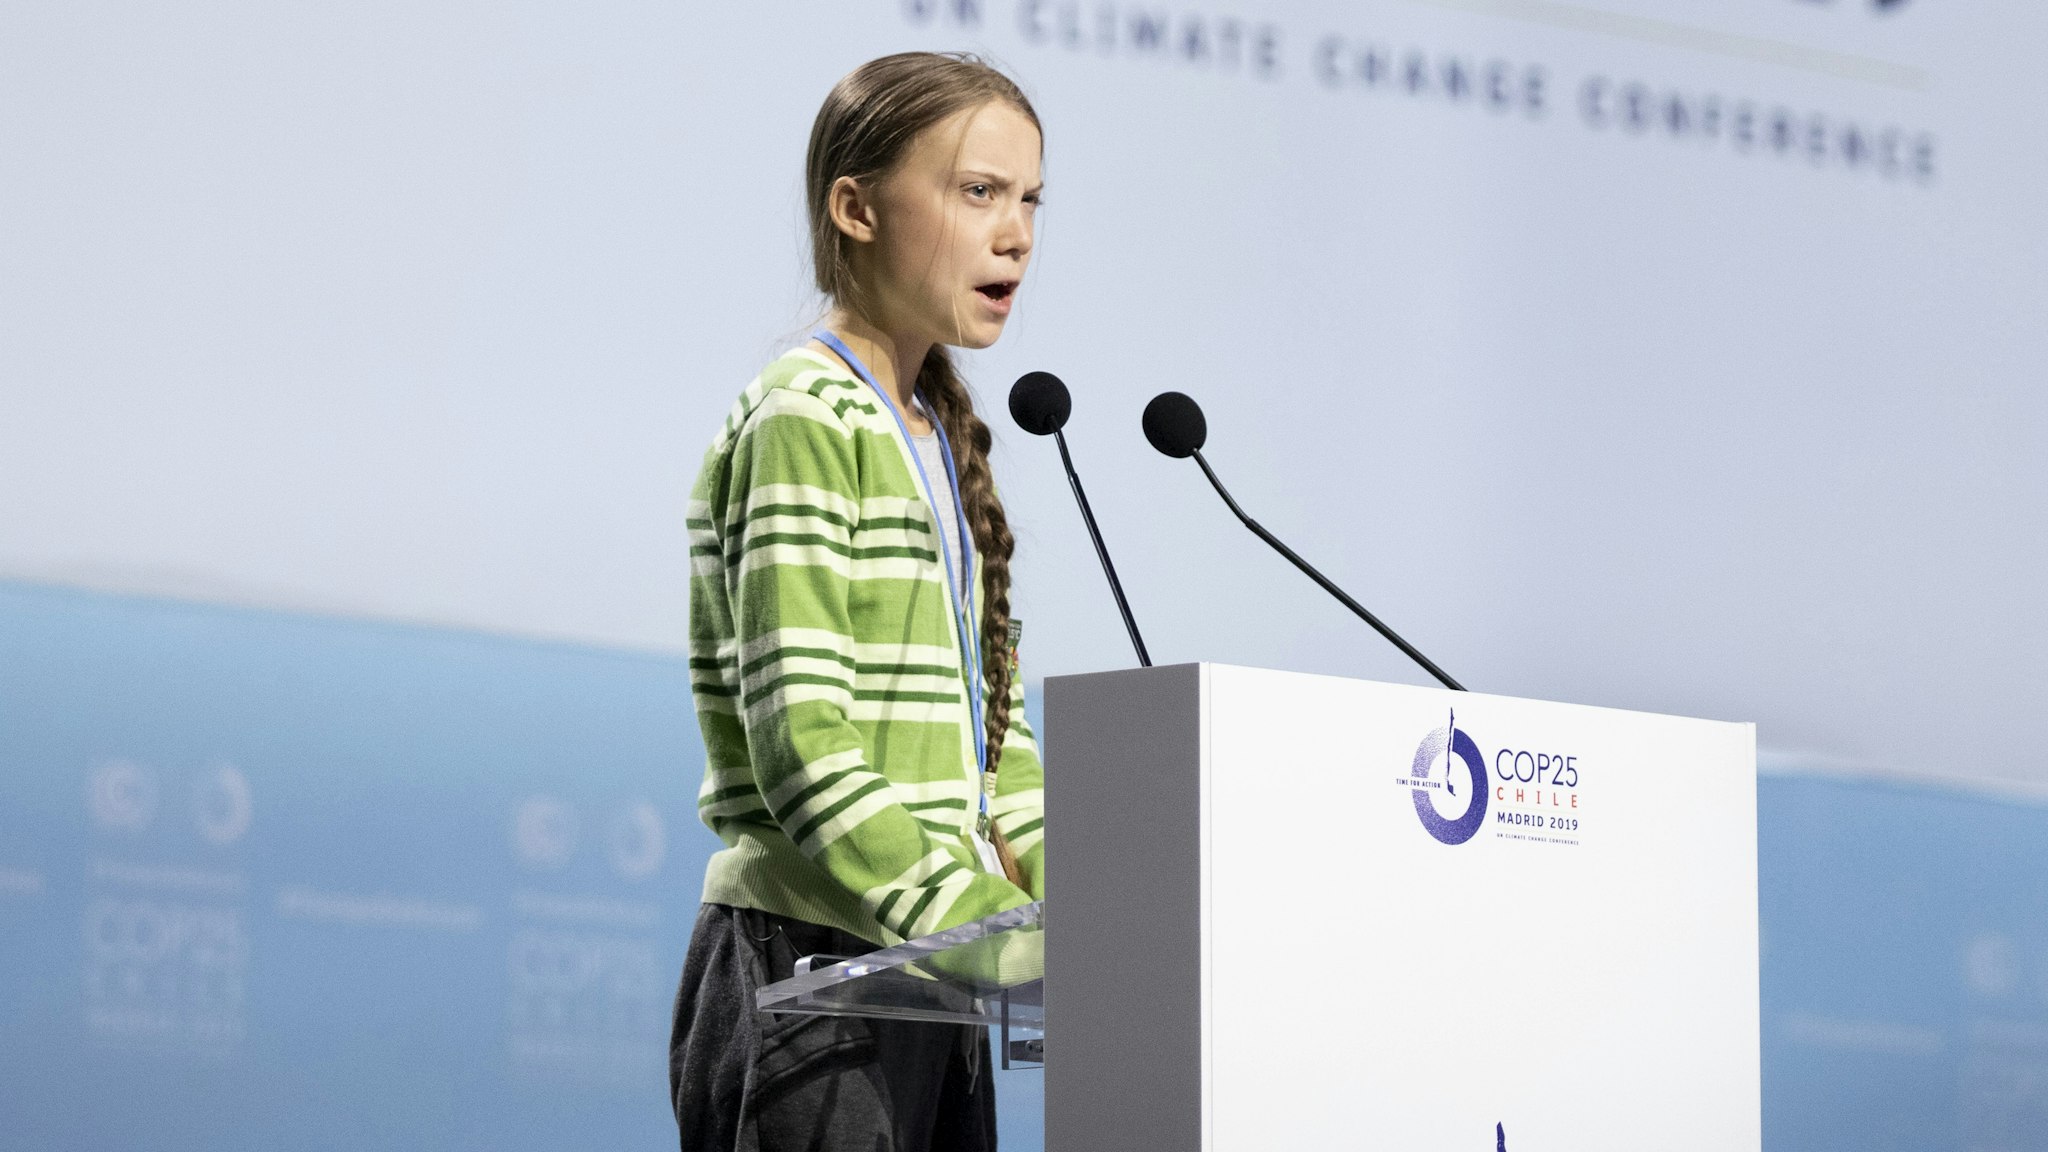 MADRID, SPAIN - DECEMBER 11: Swedish environment activist Greta Thunberg gives a speech at the plenary session during the COP25 Climate Conference on December 11, 2019 in Madrid, Spain. The COP25 conference brings together world leaders, climate activists, NGOs, indigenous people and others for two weeks in an effort to focus global policy makers on concrete steps for heading off a further rise in global temperatures.